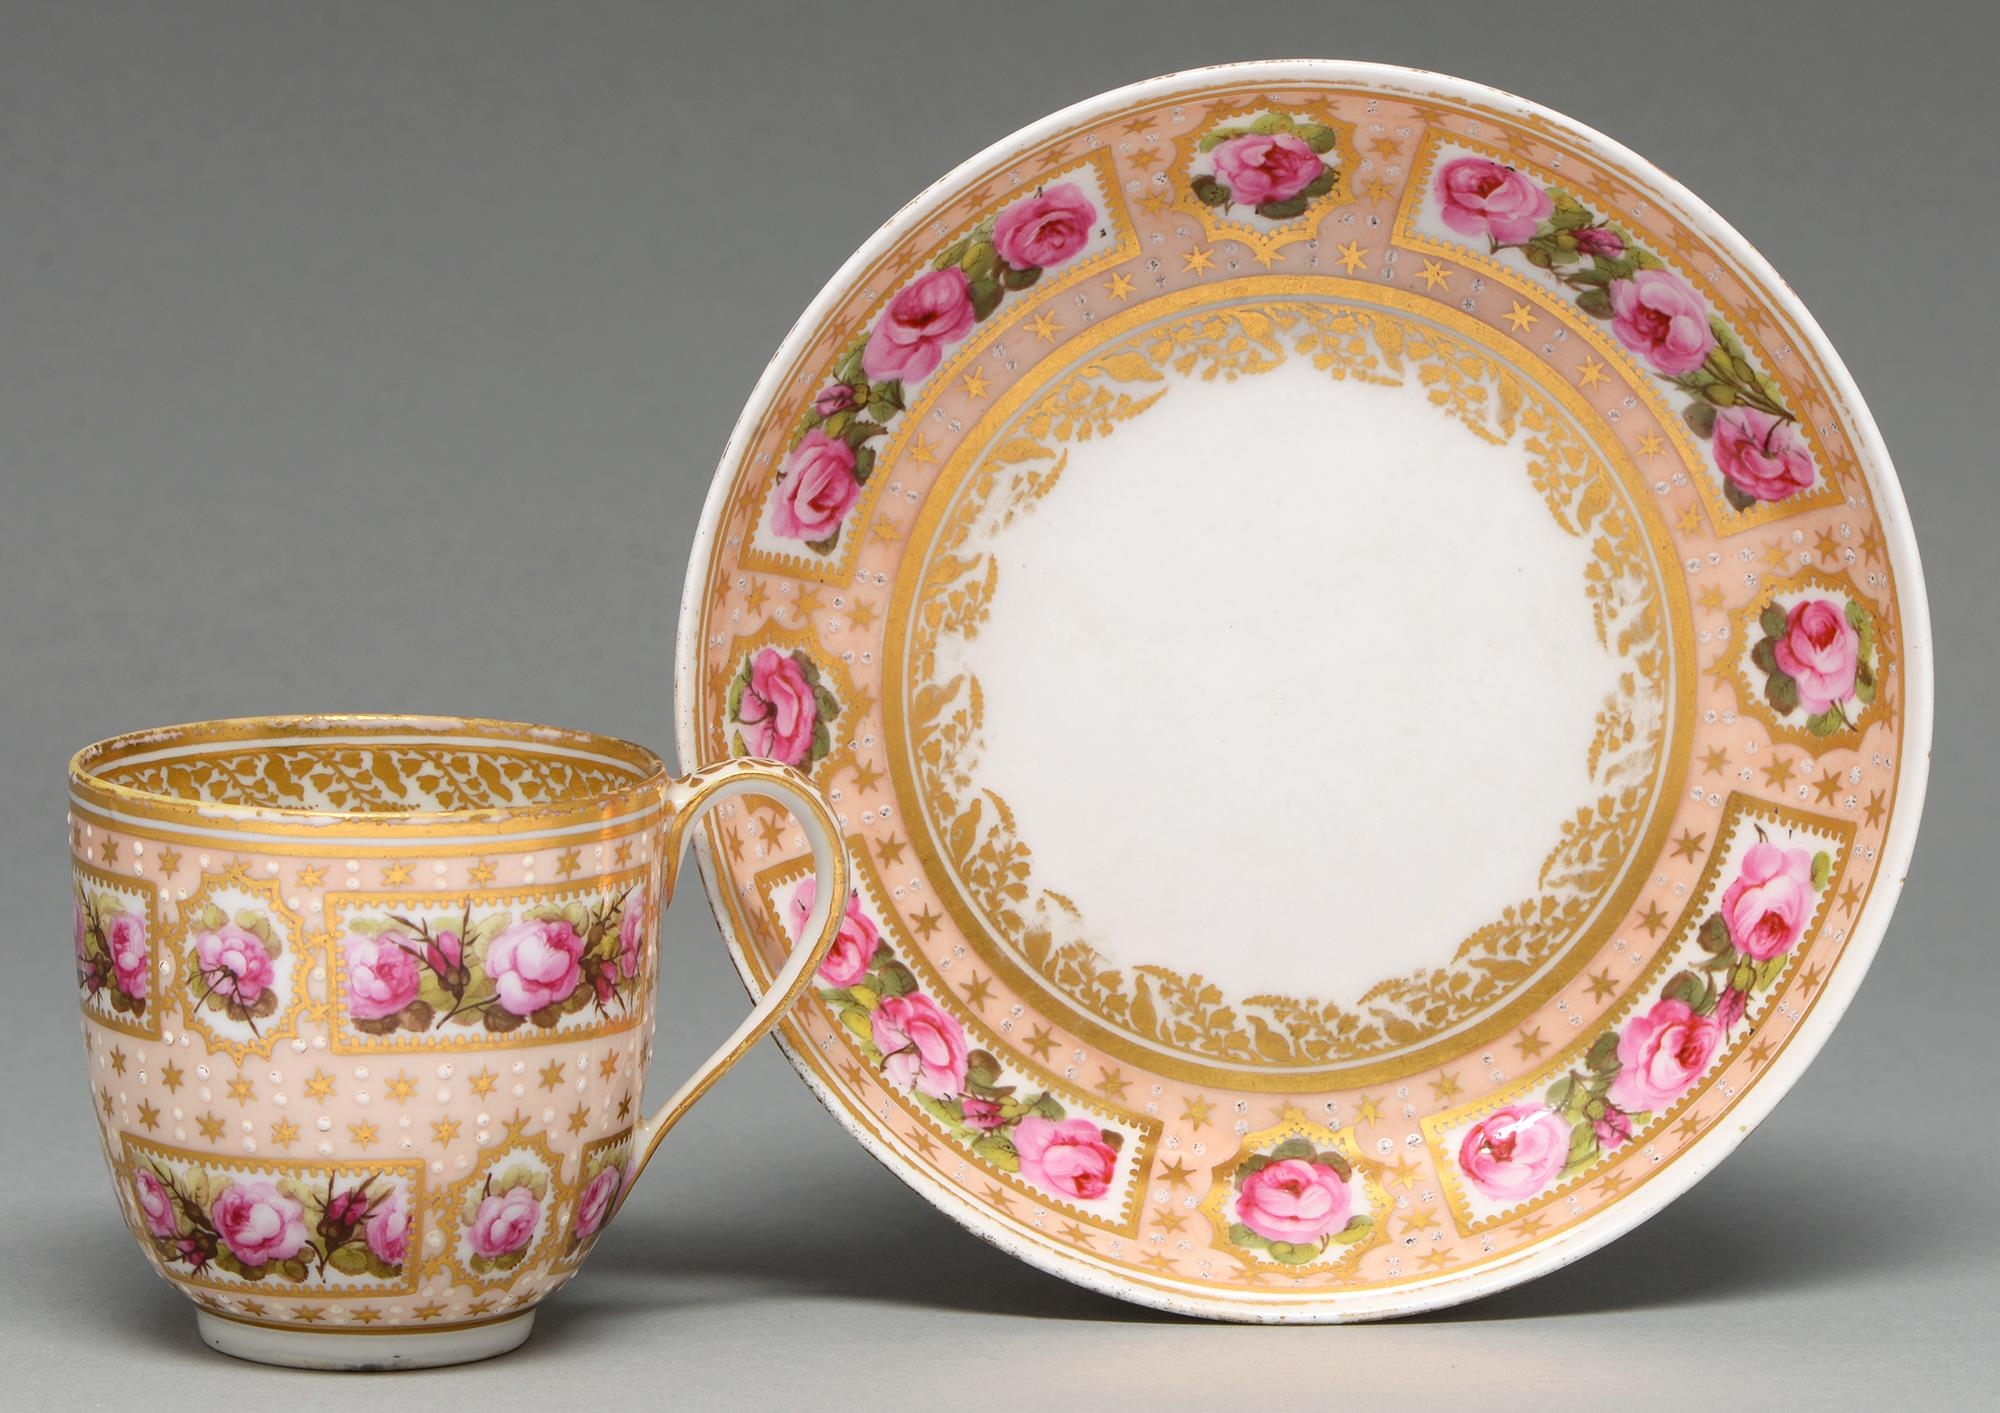 A Derby coffee cup and saucer, c1795, painted with reserves of roses on a salmon pink ground, saucer